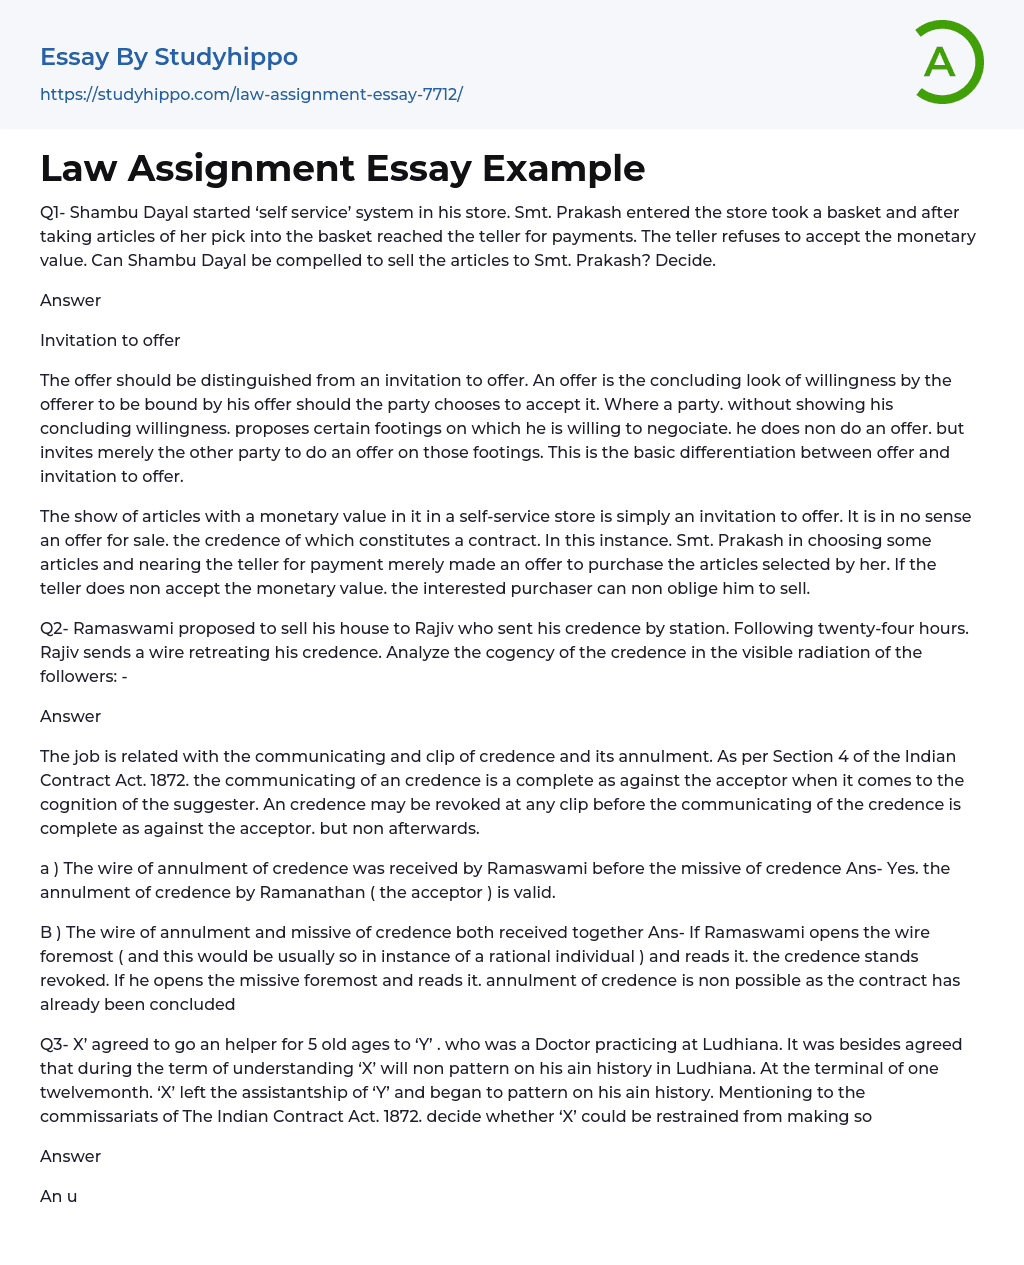 Law Assignment Essay Example